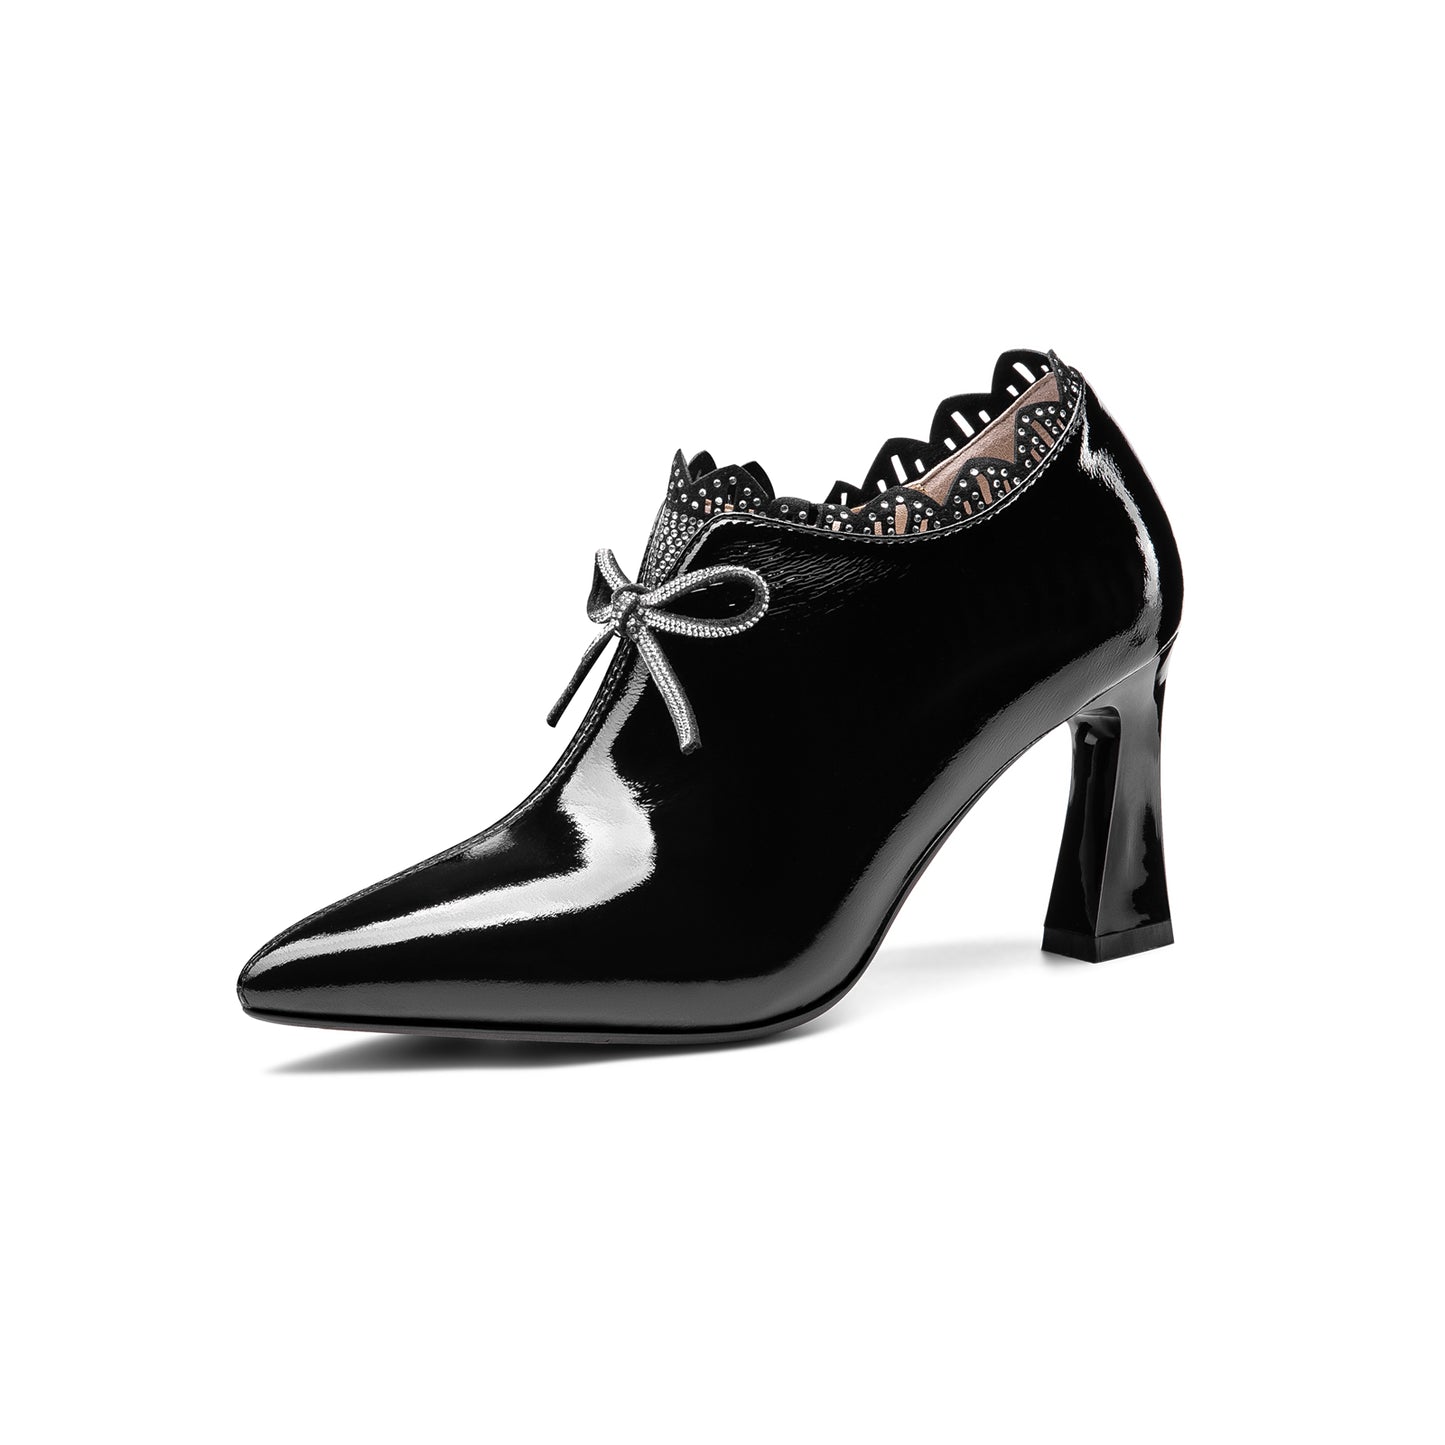 TinaCus Women's Handmade Glossy Patent Leather Pointed Toe Mid Heel Side Zip Up Pump Shoes with Cute Bowtie